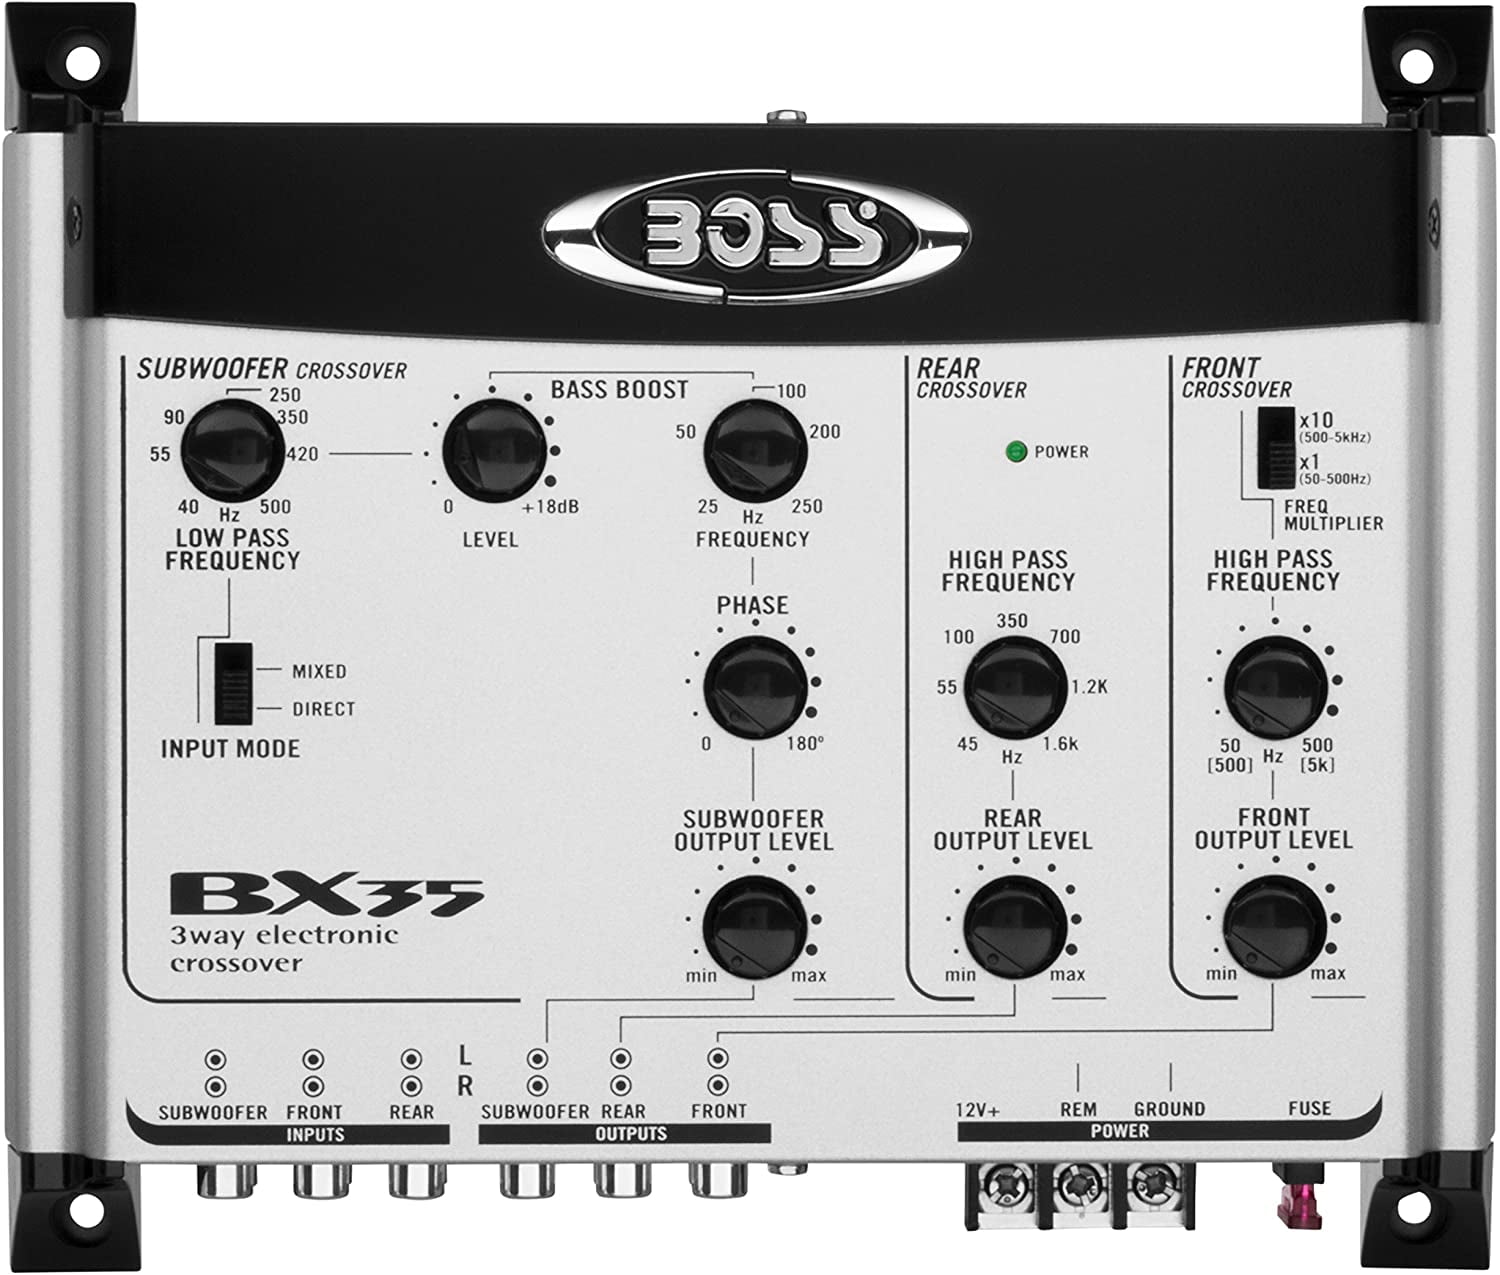 BOSS Systems Electronic Car Crossover - 3 Way, Pre-Amp, Fine Tune Your High-Mid-Low Range Speaker Frequencies - Walmart.com